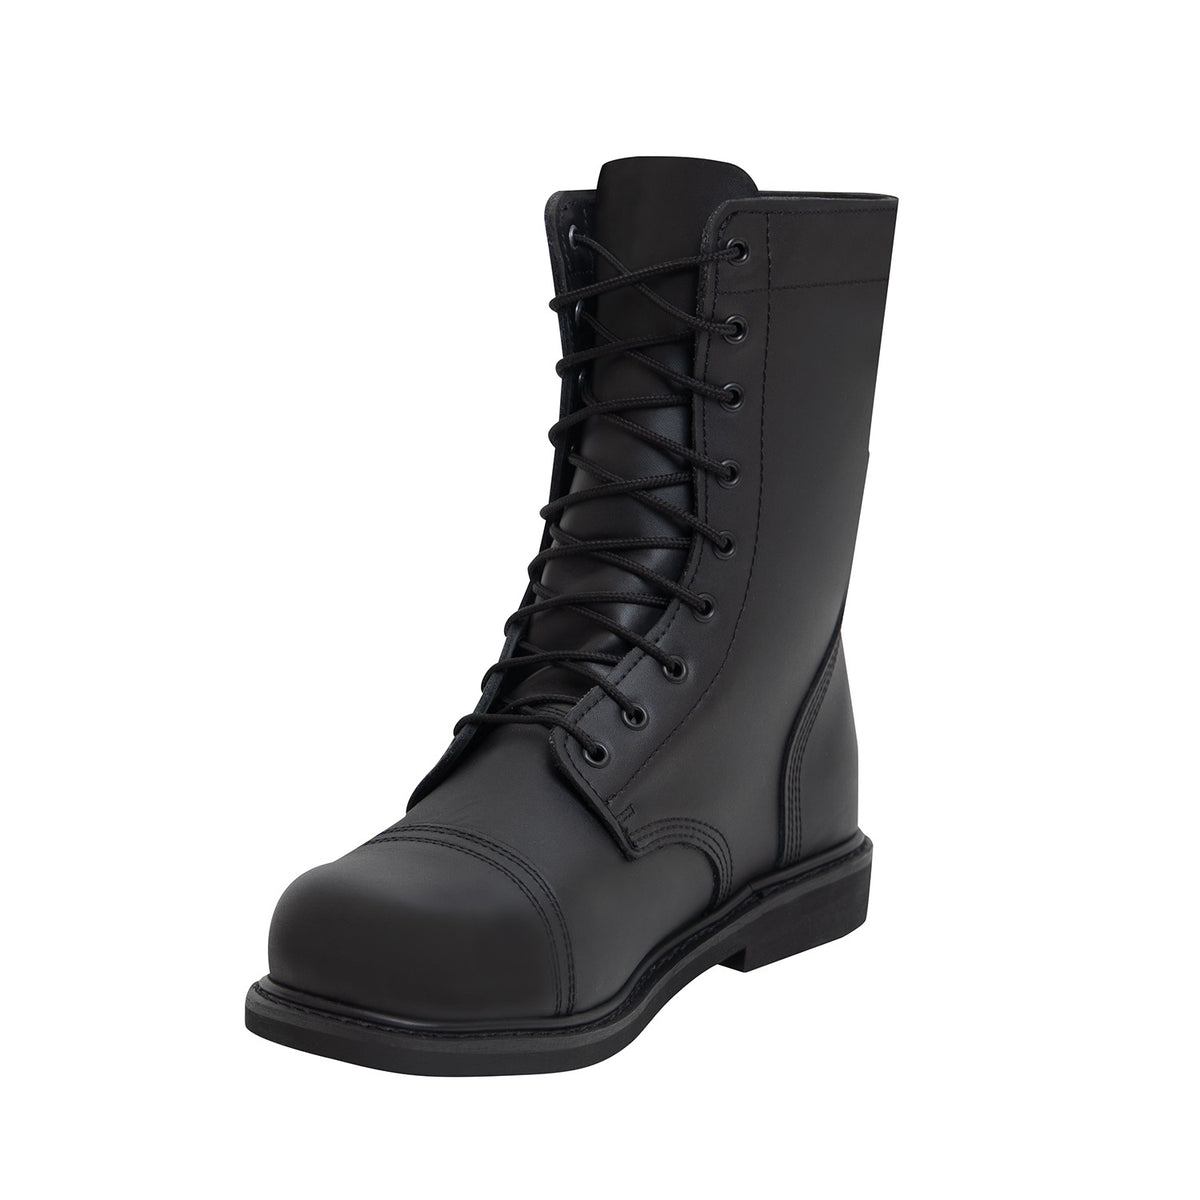 Rothco G.I.Type Steel Toe Combat Boot